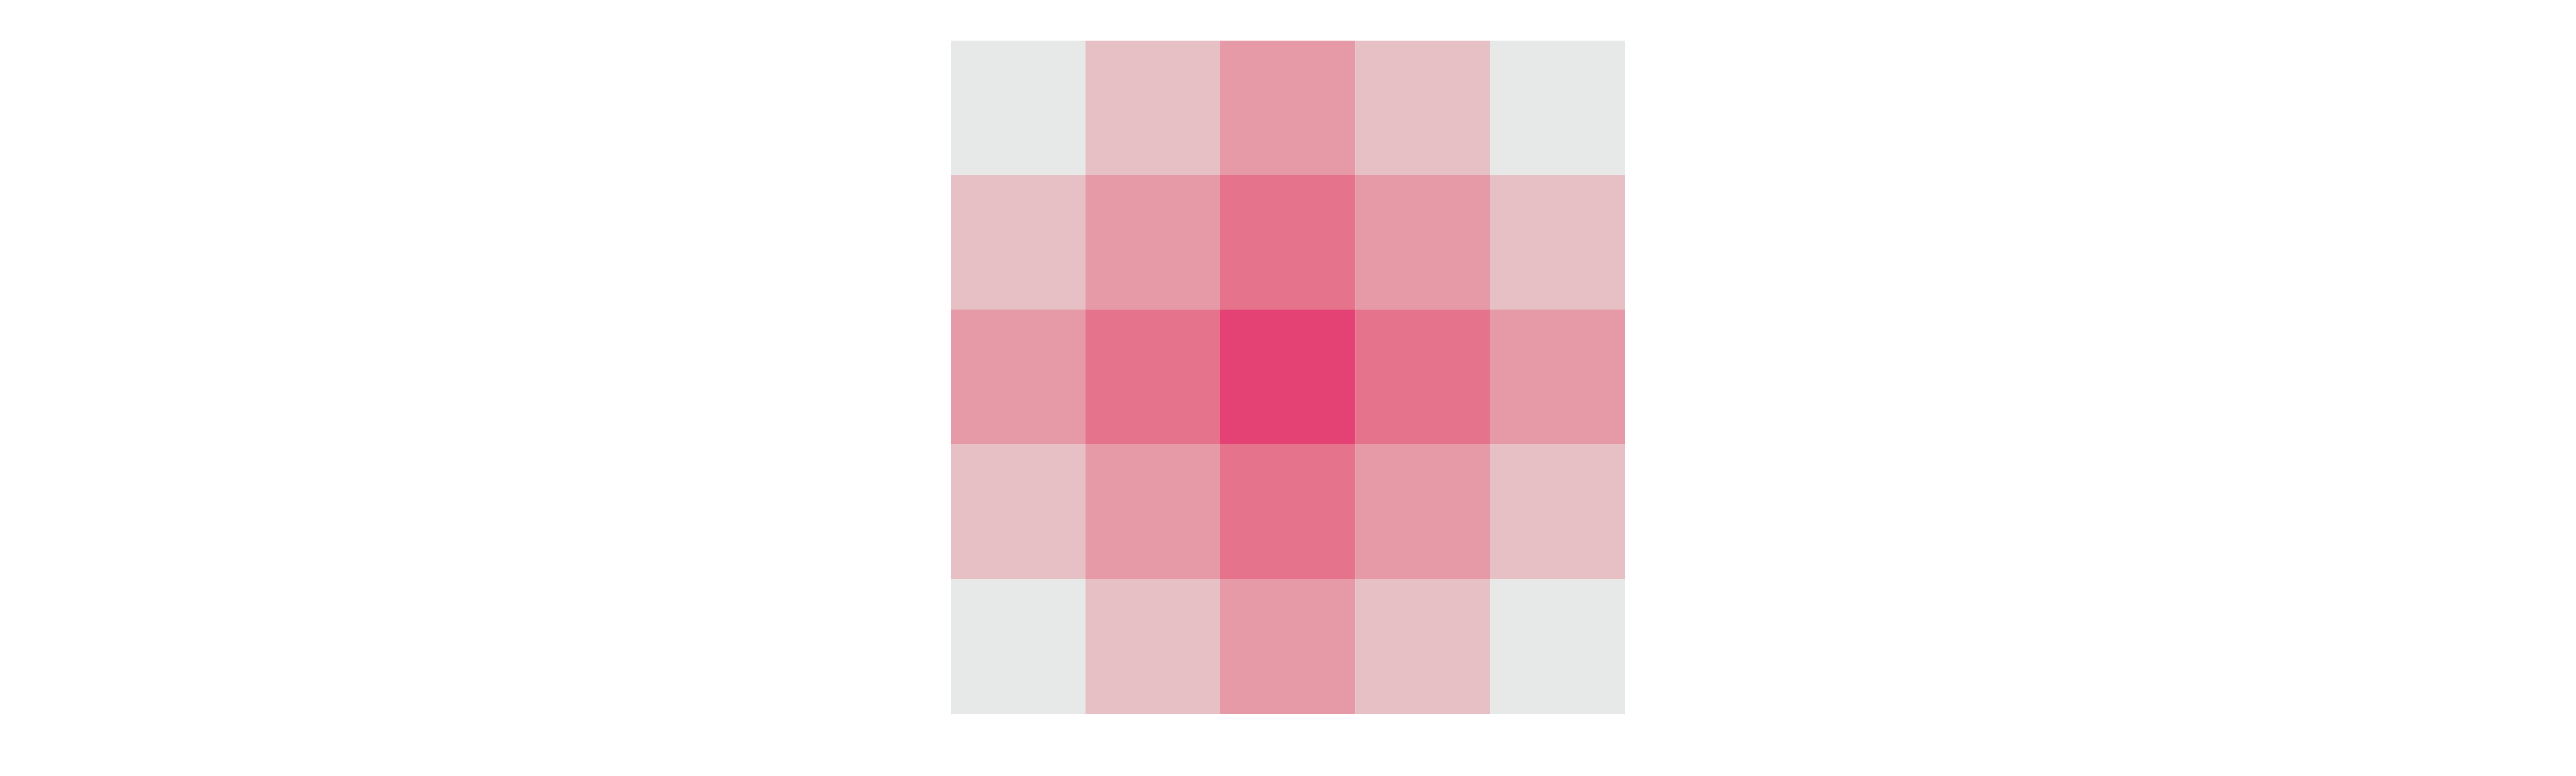 5x5 square grid representing saturation. The centre square has a pure hue of pink. All the squares radiating out from the centre gradually change to lighter amounts of hue.